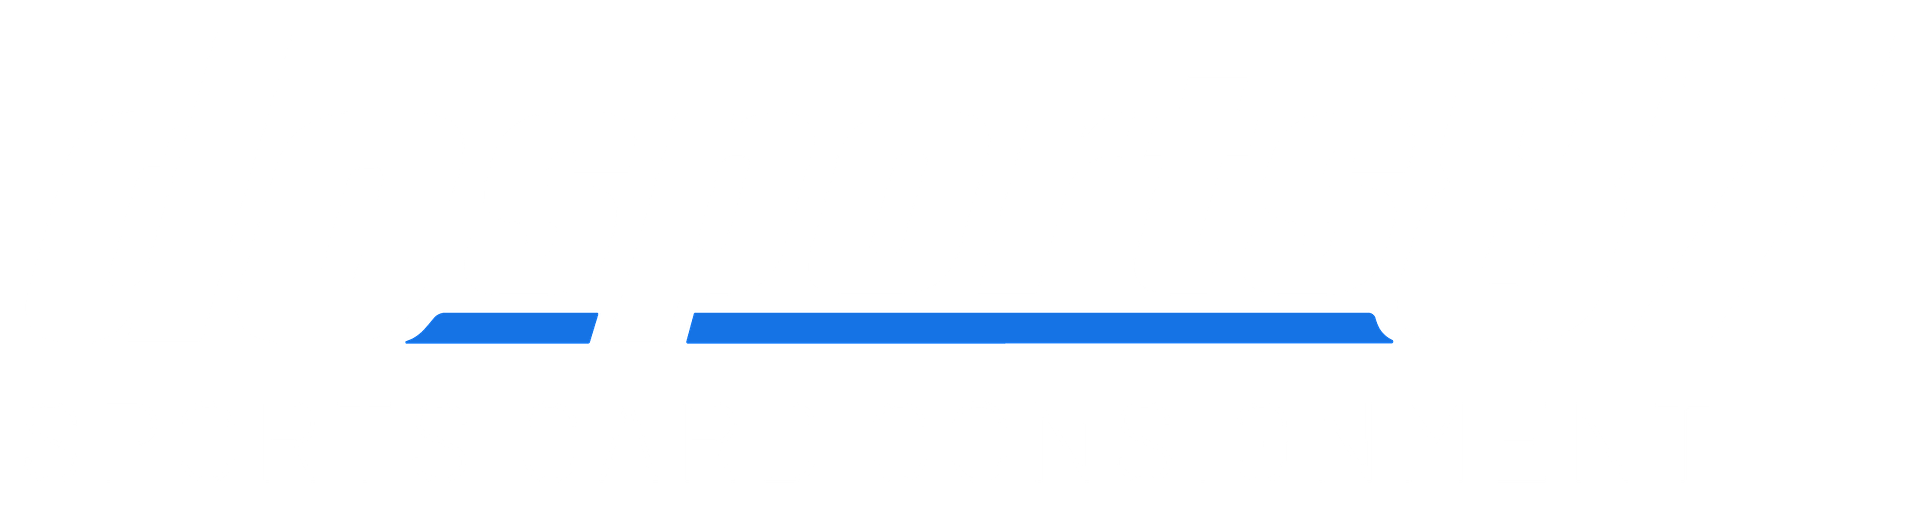 dcsports87 SPORTS CARD CONSIGNMENT